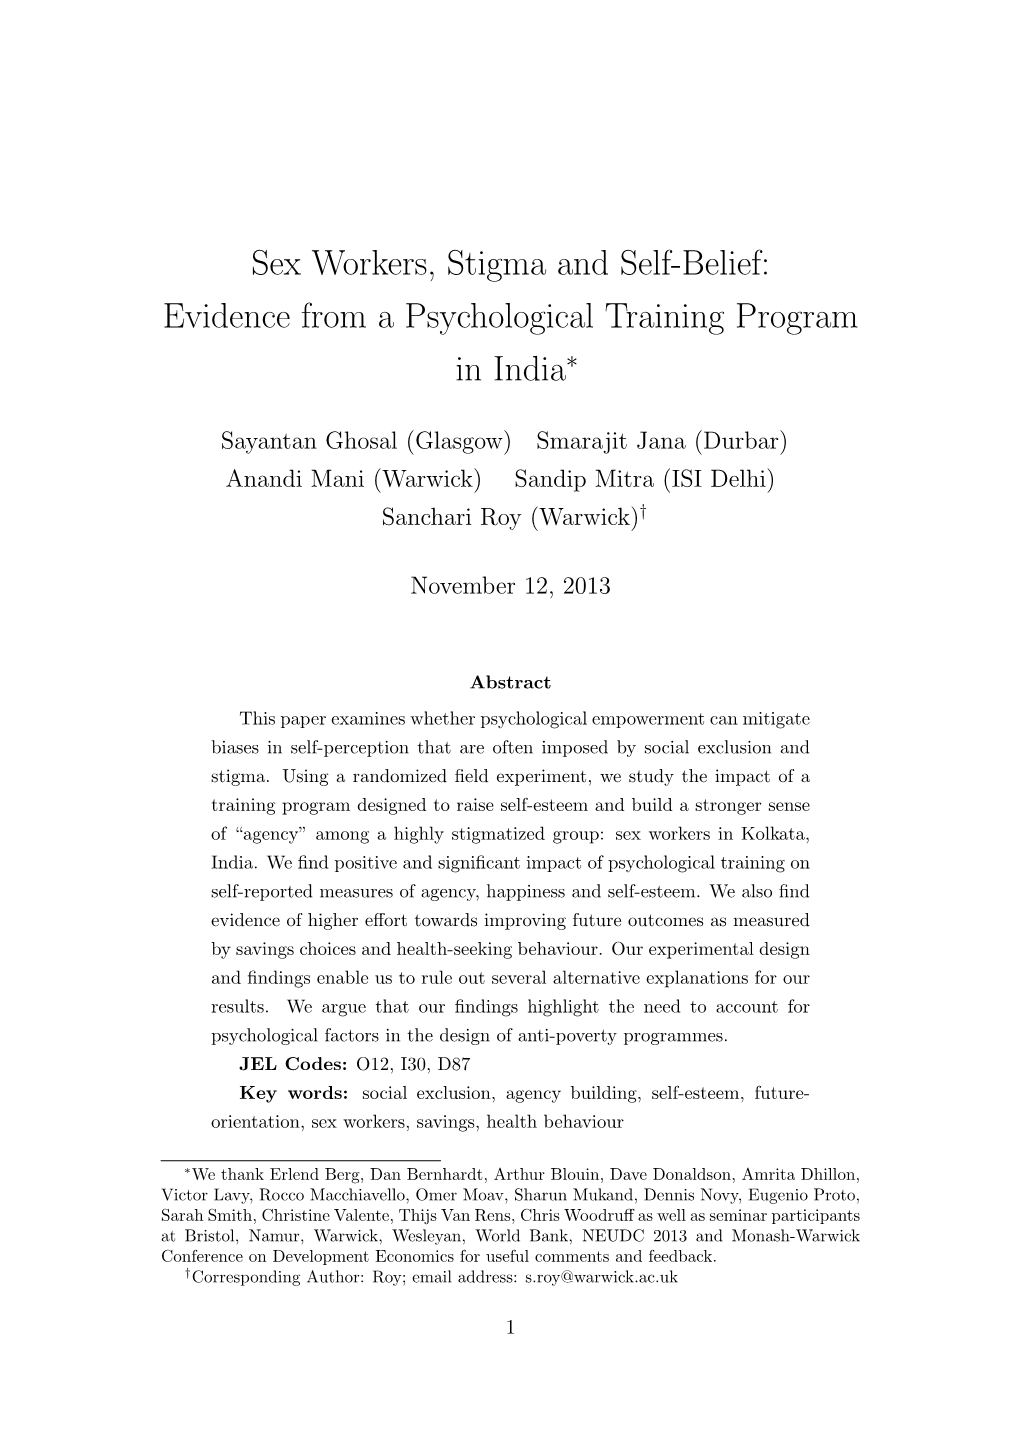 Sex Workers, Stigma and Self-Belief: Evidence from a Psychological Training Program in India∗